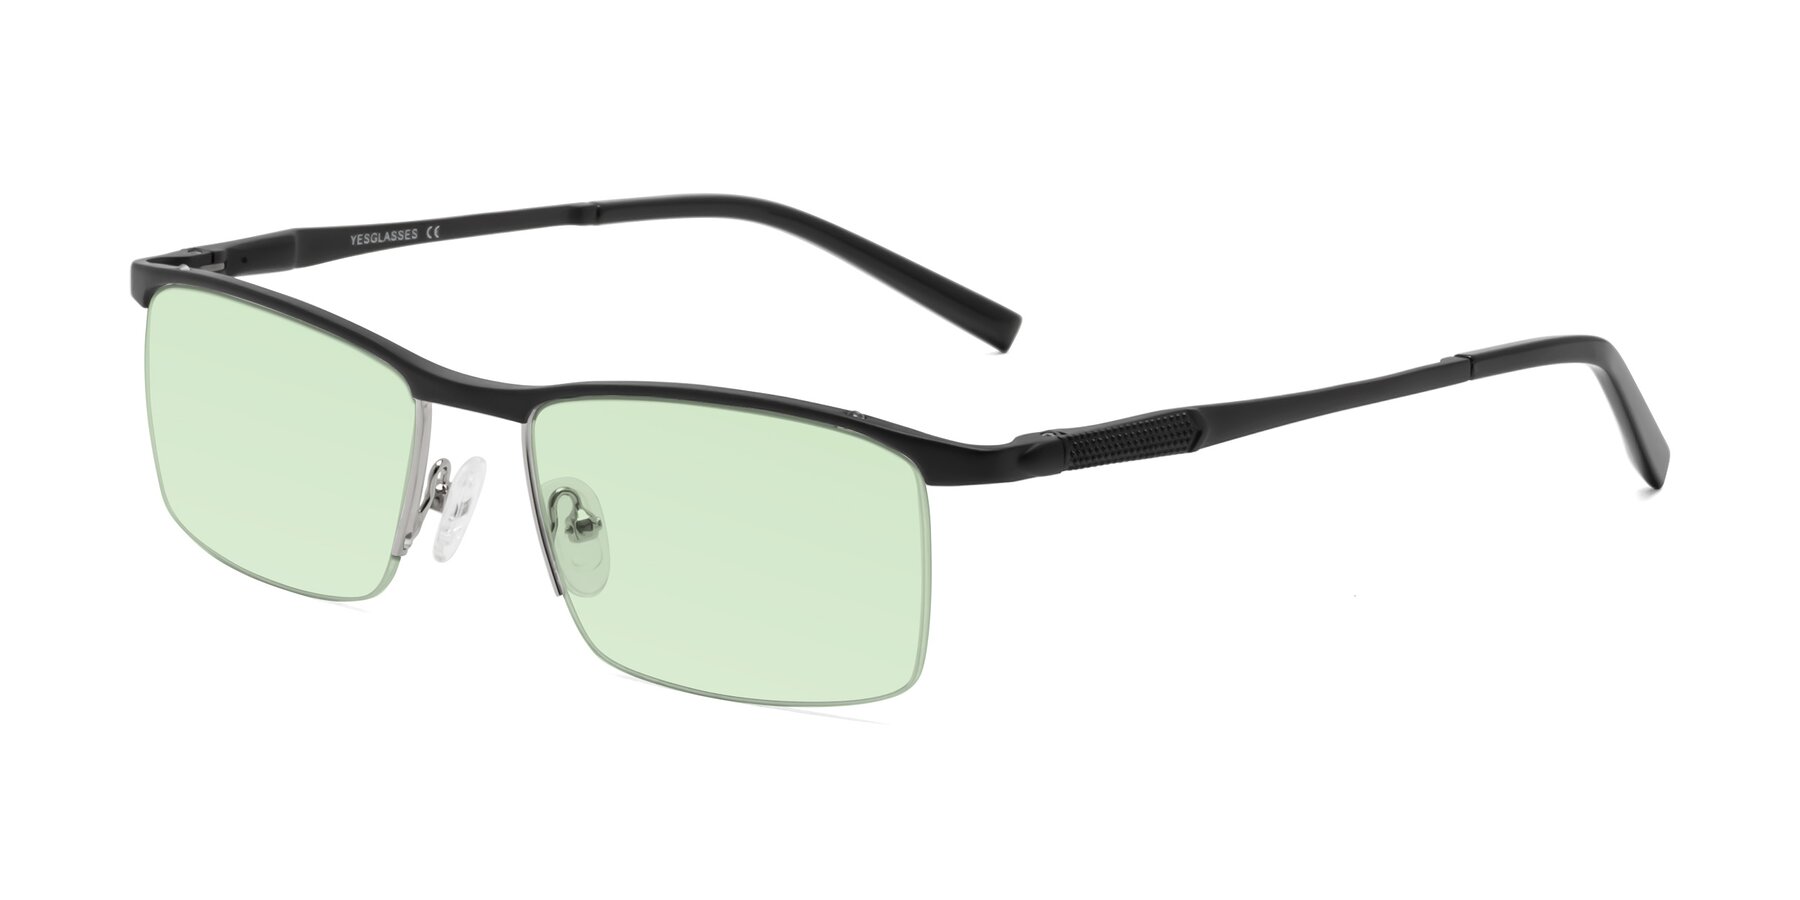 Angle of CX6303 in Black with Light Green Tinted Lenses